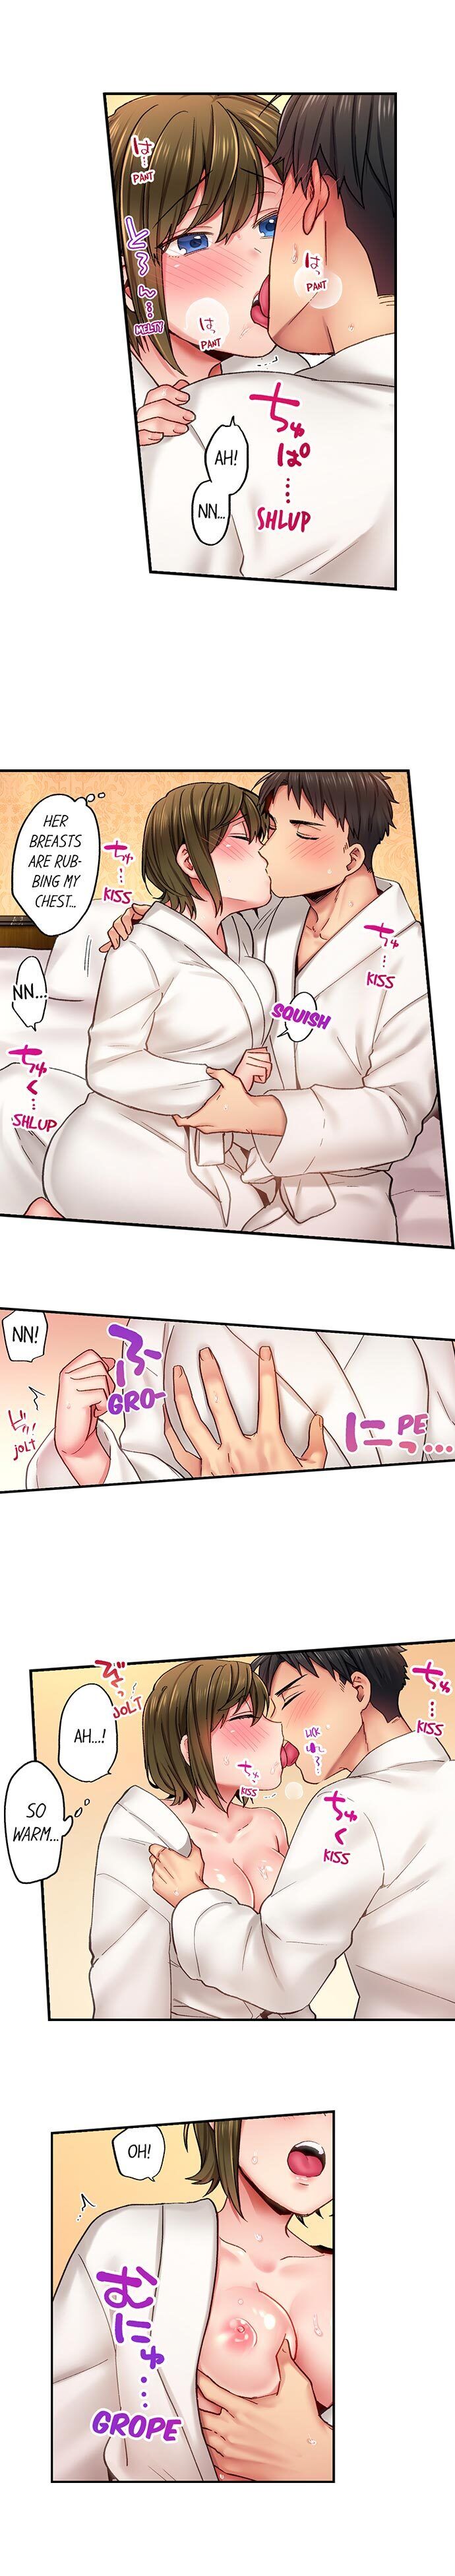 From Poker Face to Cumming Face in 90 Seconds - Chapter 10 Page 5